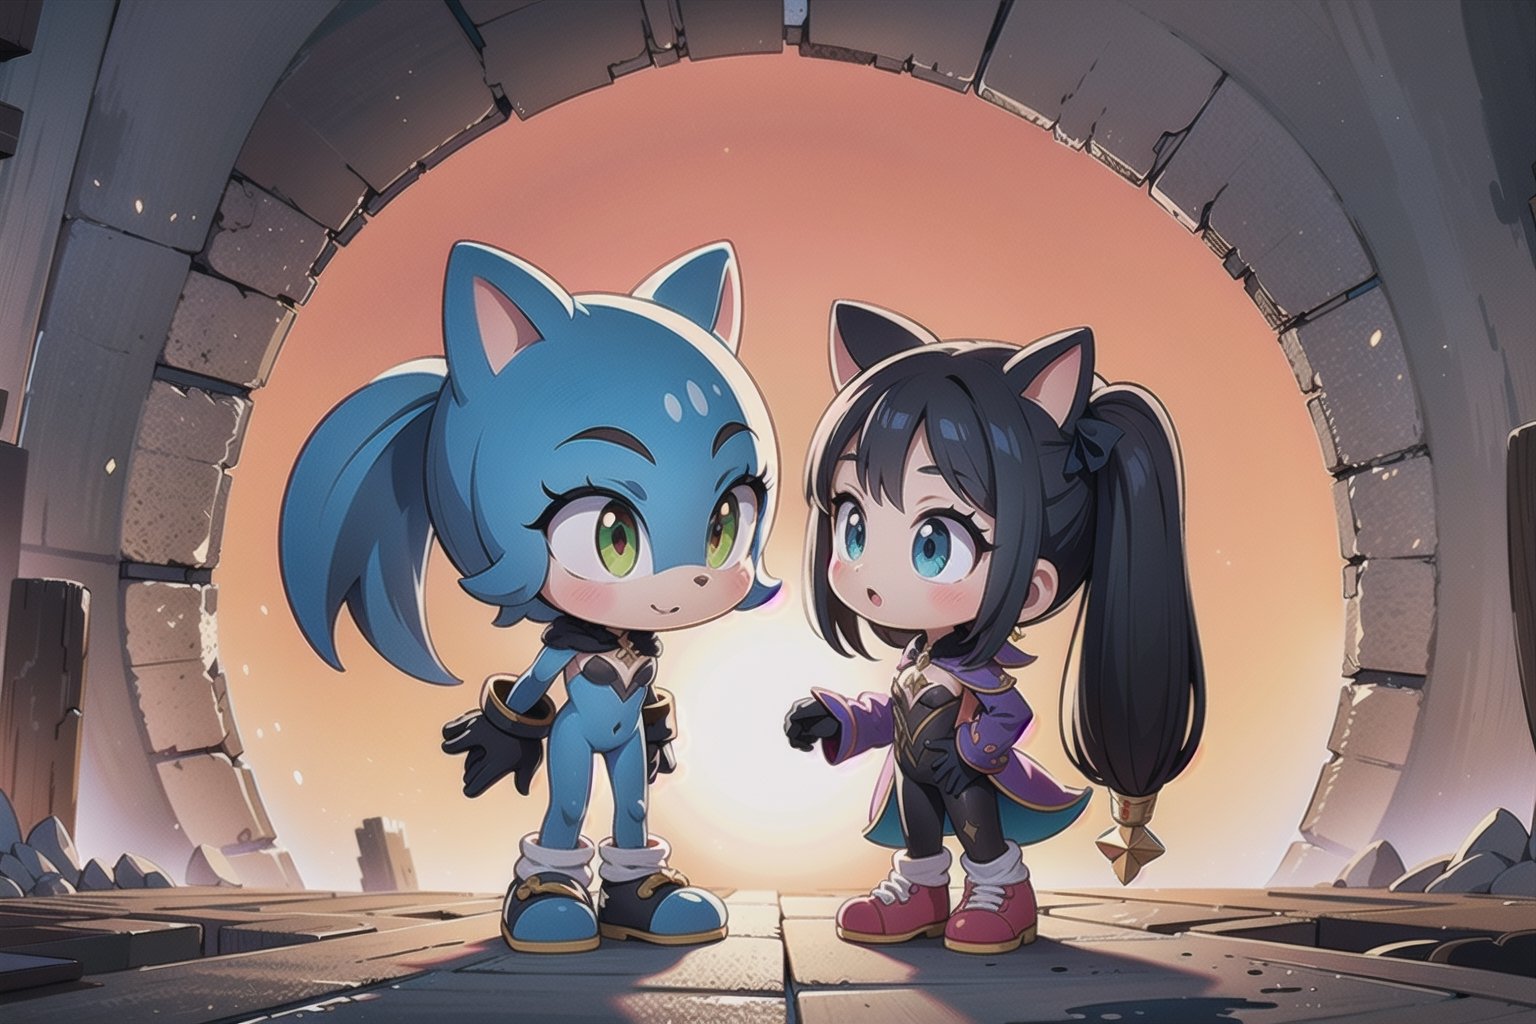 Here's a prompt based on your input:

Create an image of Monadef and Sonic the Hedgehog standing together against the warm orange sky of Looney's sun-kissed backdrop. The dark figures of the duo are silhouetted sharply against the vibrant colors, with Sonic's bright blue spikes and fiery red shoes standing out against the weathered gray stone. Rendered in breathtaking 32K UHD, the characters' forms seem to vibrate with kinetic energy, as if ready to burst forth from the frame at any moment. The composition captures the dynamic duo's united stance, frozen in a moment of anticipation.